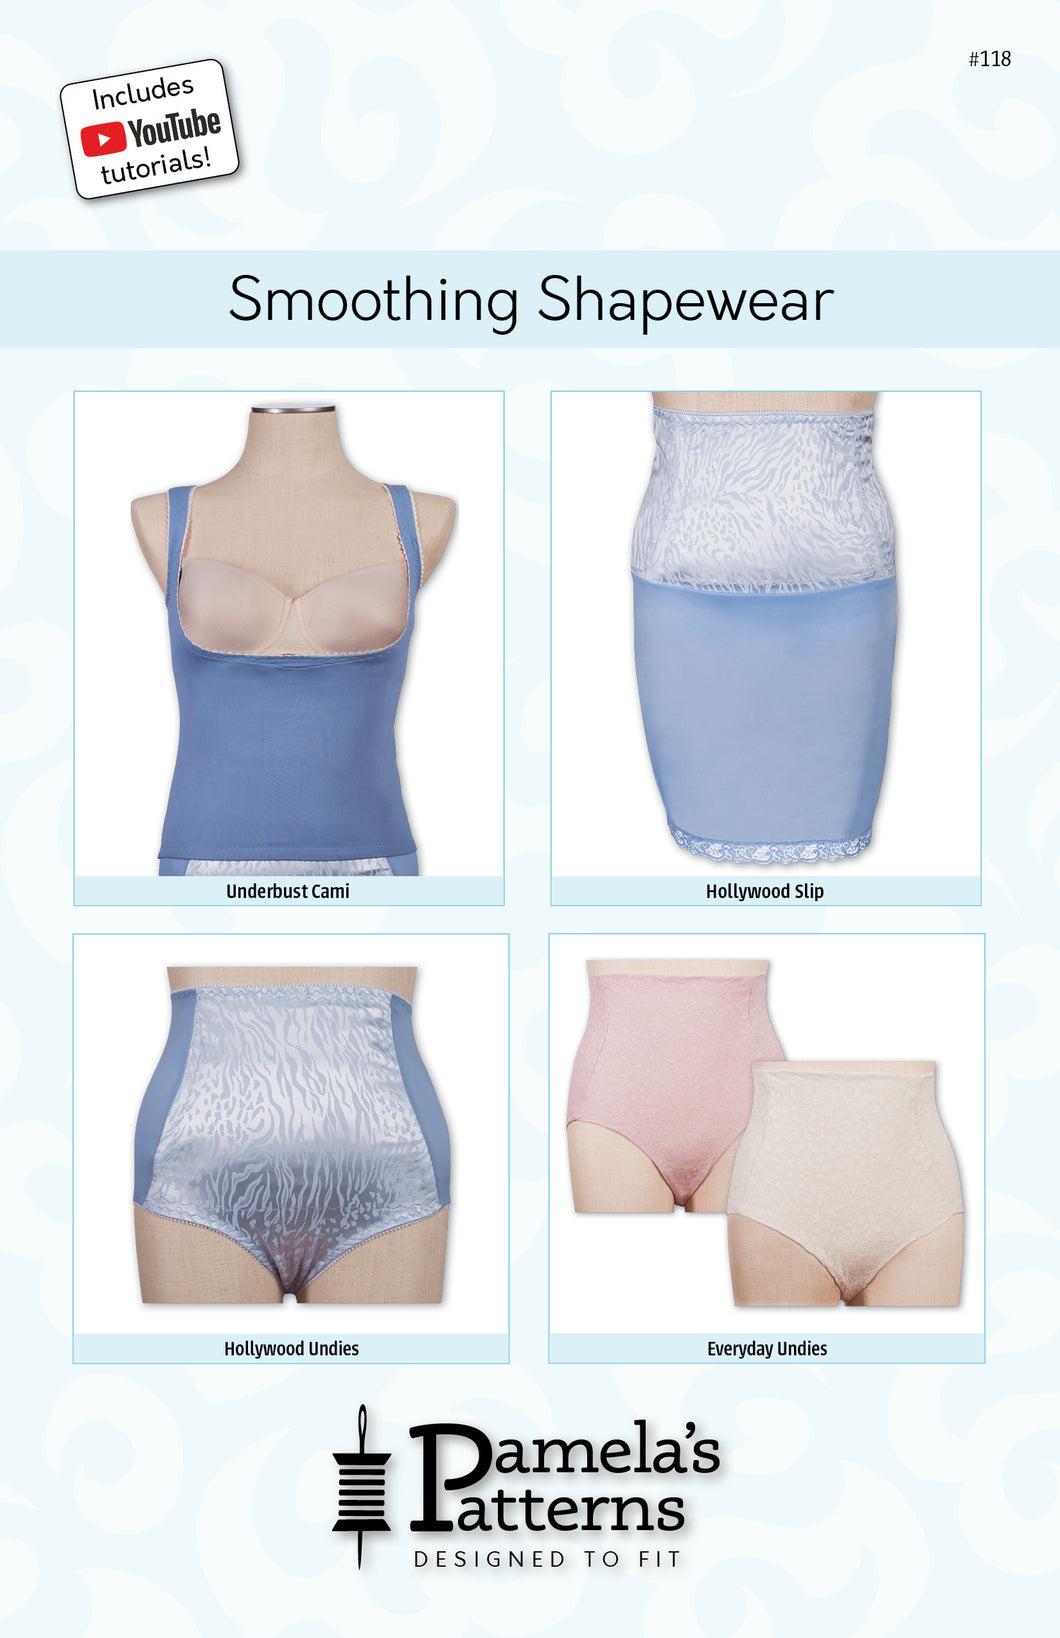 If you are looking for a shapewear body suit, look no further. @shapelyldn  has exactly what you need. It's comfortable, smoothing, and b